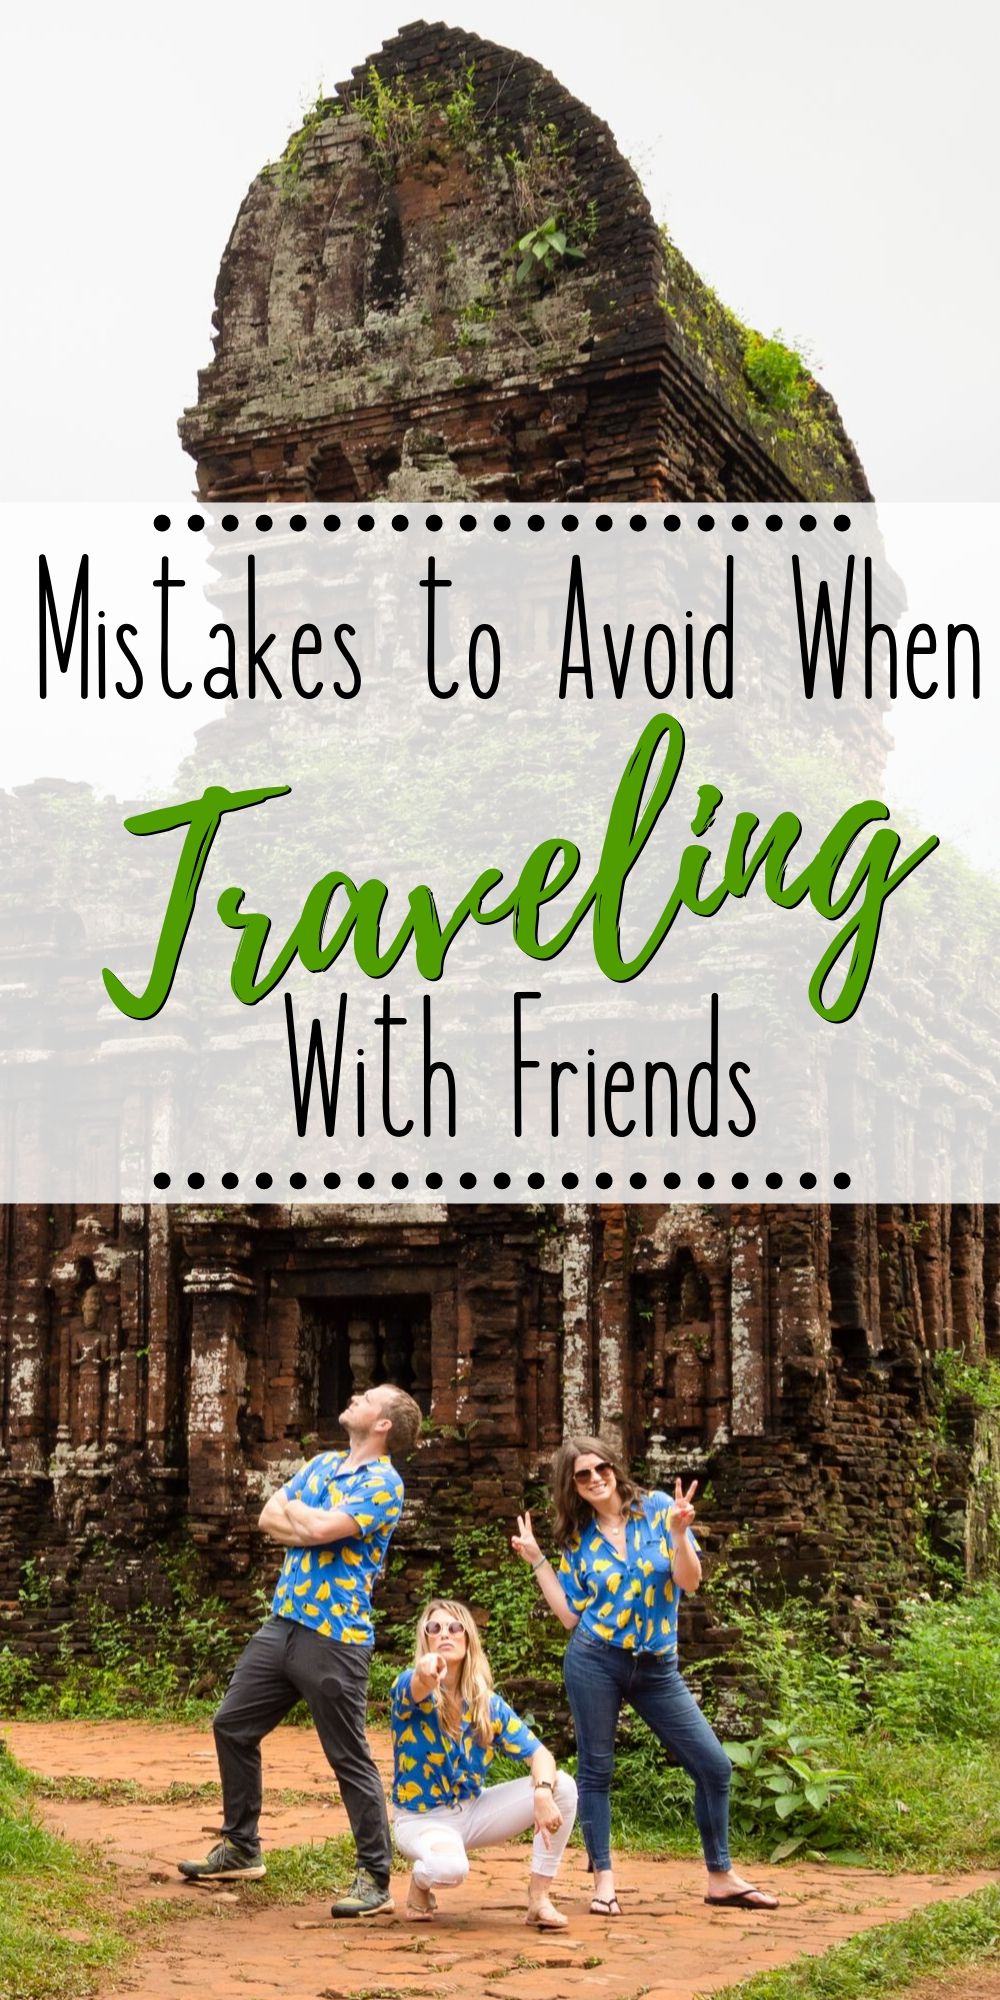 Mistakes to Avoid While Traveling with Friends on Pinterest